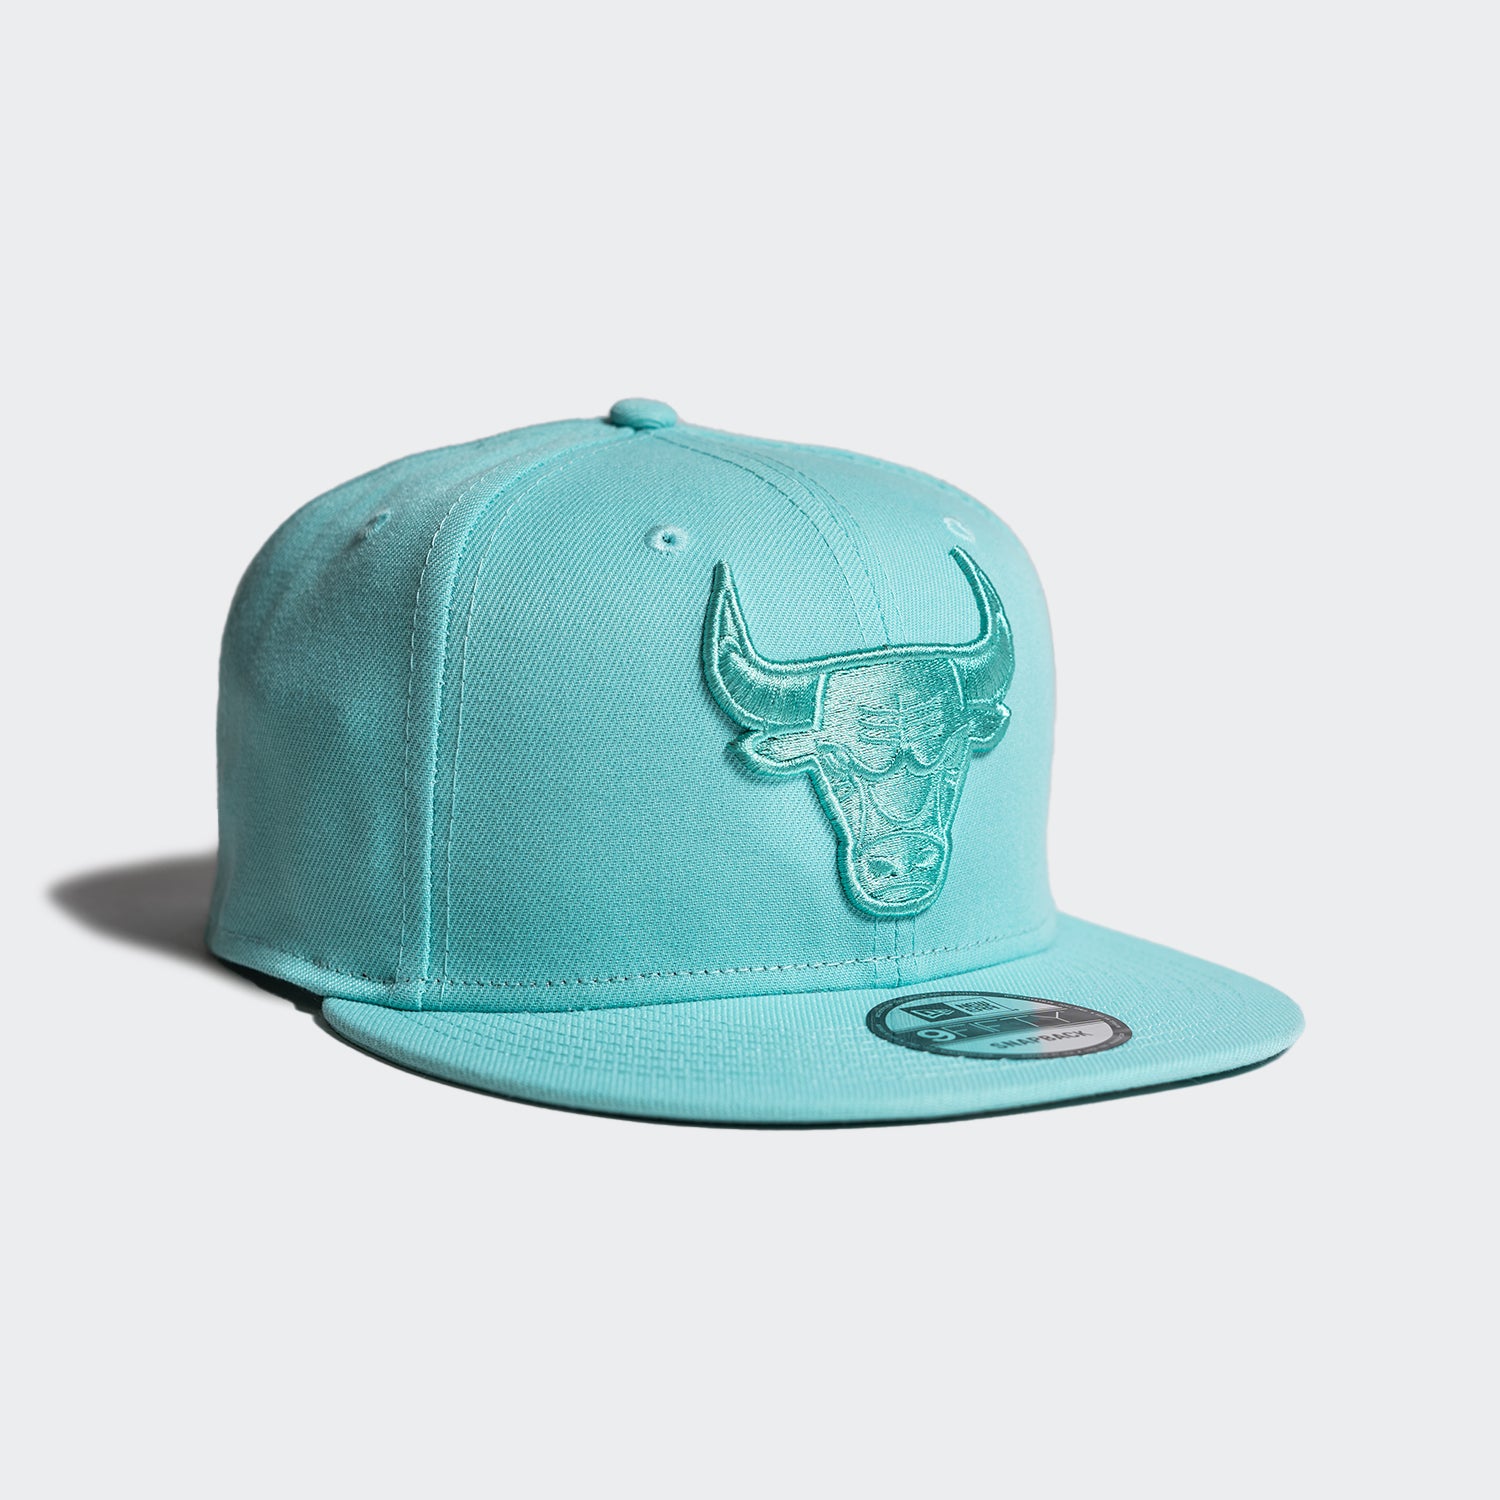 New Era Youth Chicago Bulls 9FIFTY Adjustable Snapback Hat - Each